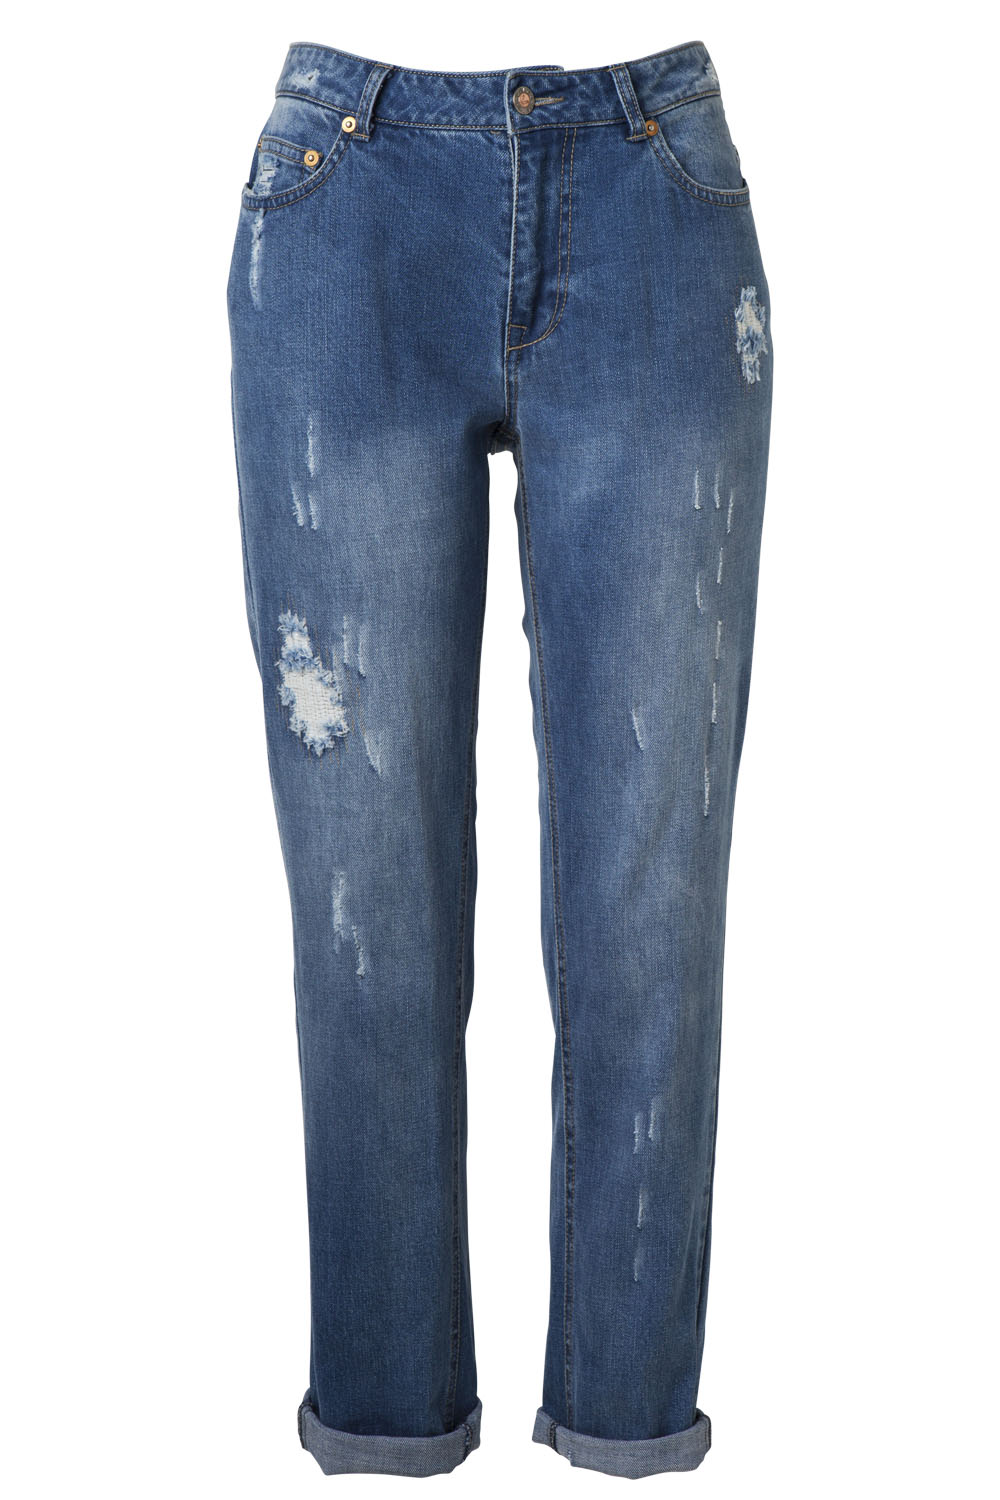 Jeans, $170, by Verge.